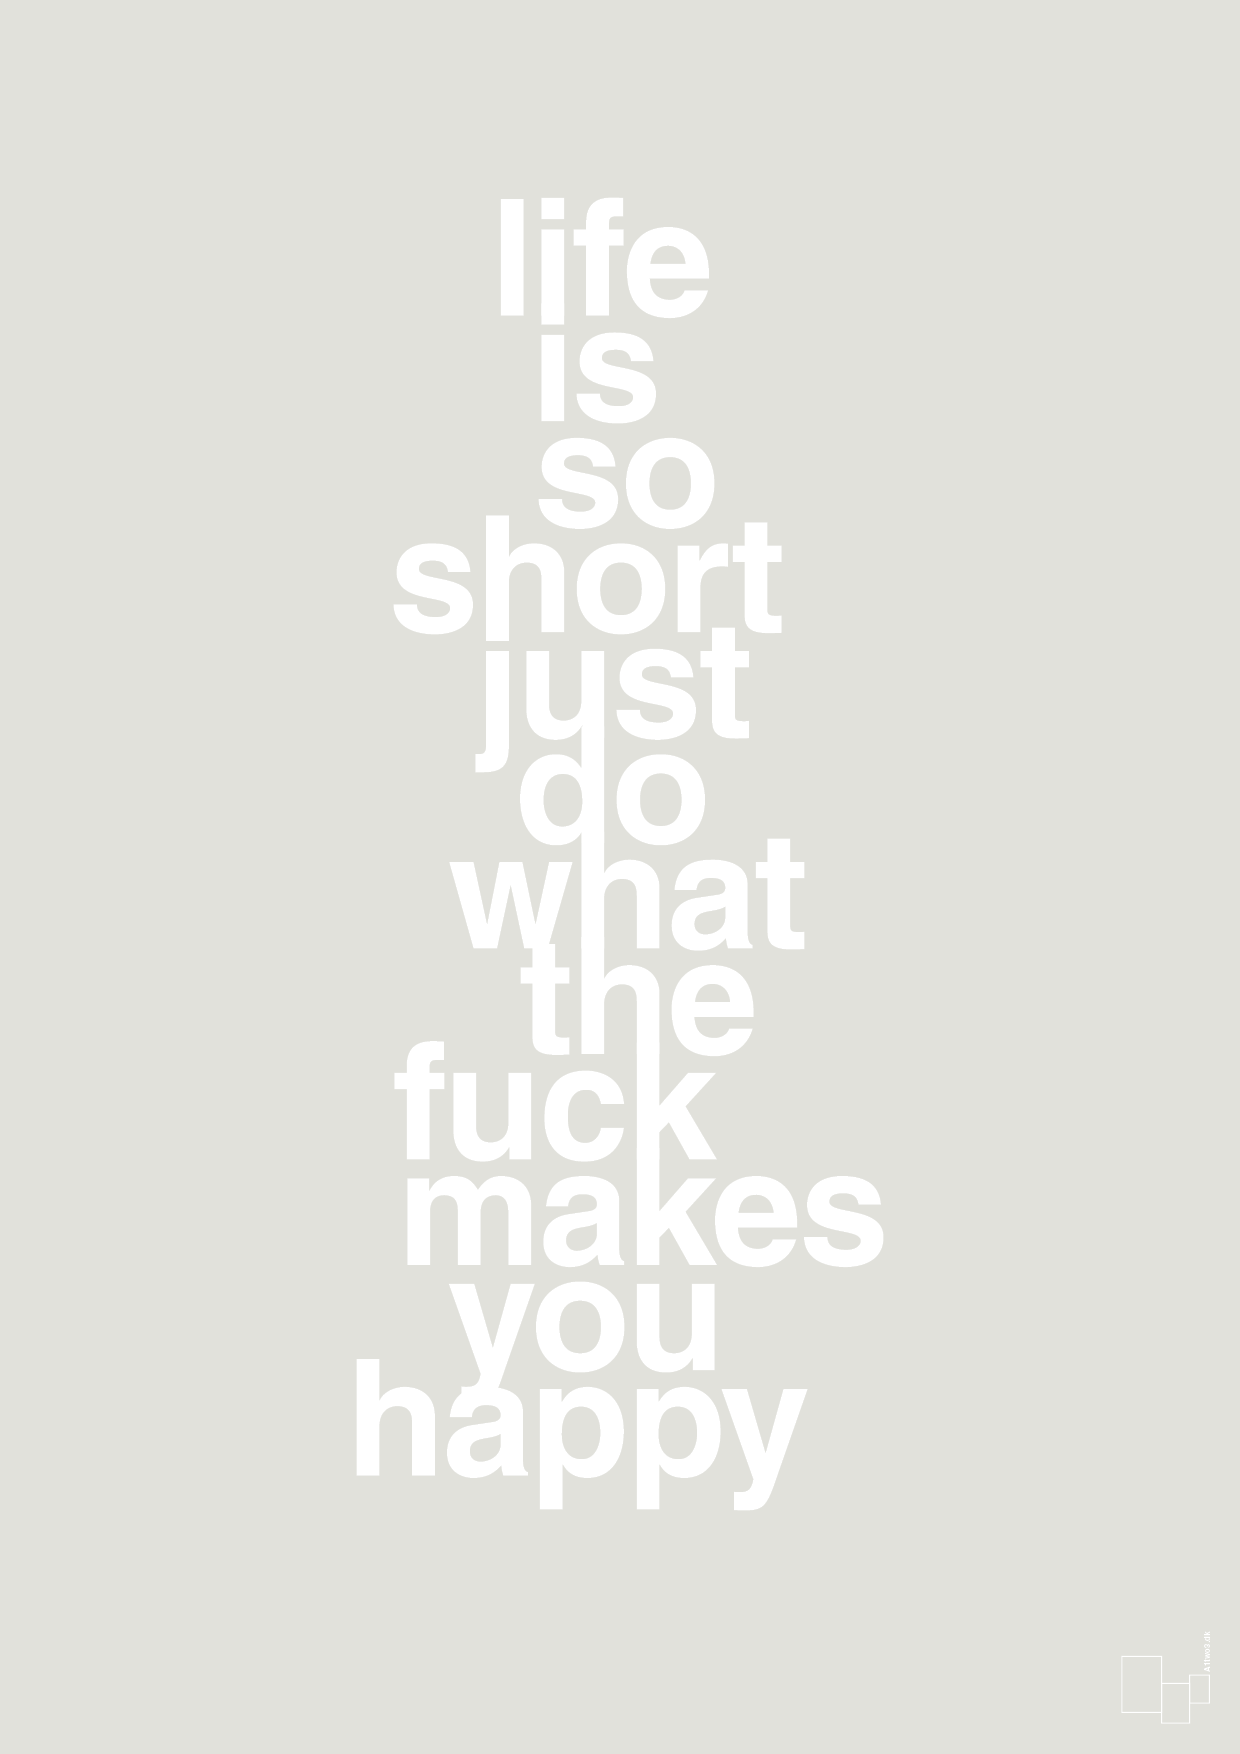 life is so short just do what the fuck makes you happy - Plakat med Ordsprog i Painters White